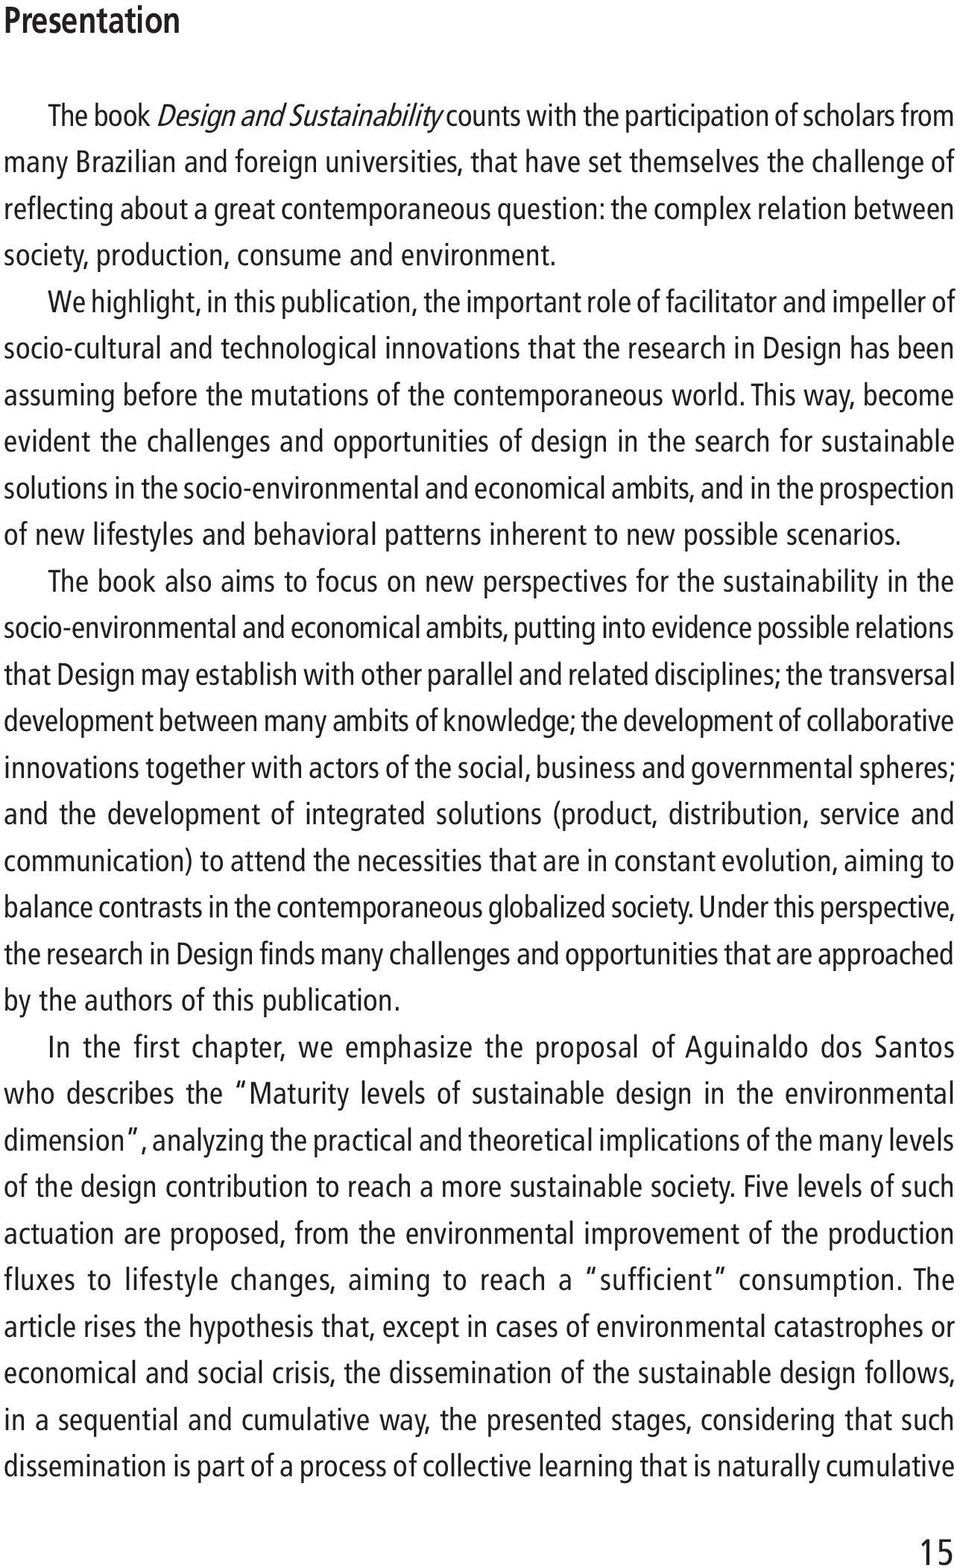 We highlight, in this publication, the important role offacilitator and impeller of socio-cultural and technological innovations that the research in Design has been assuming before the mutations of